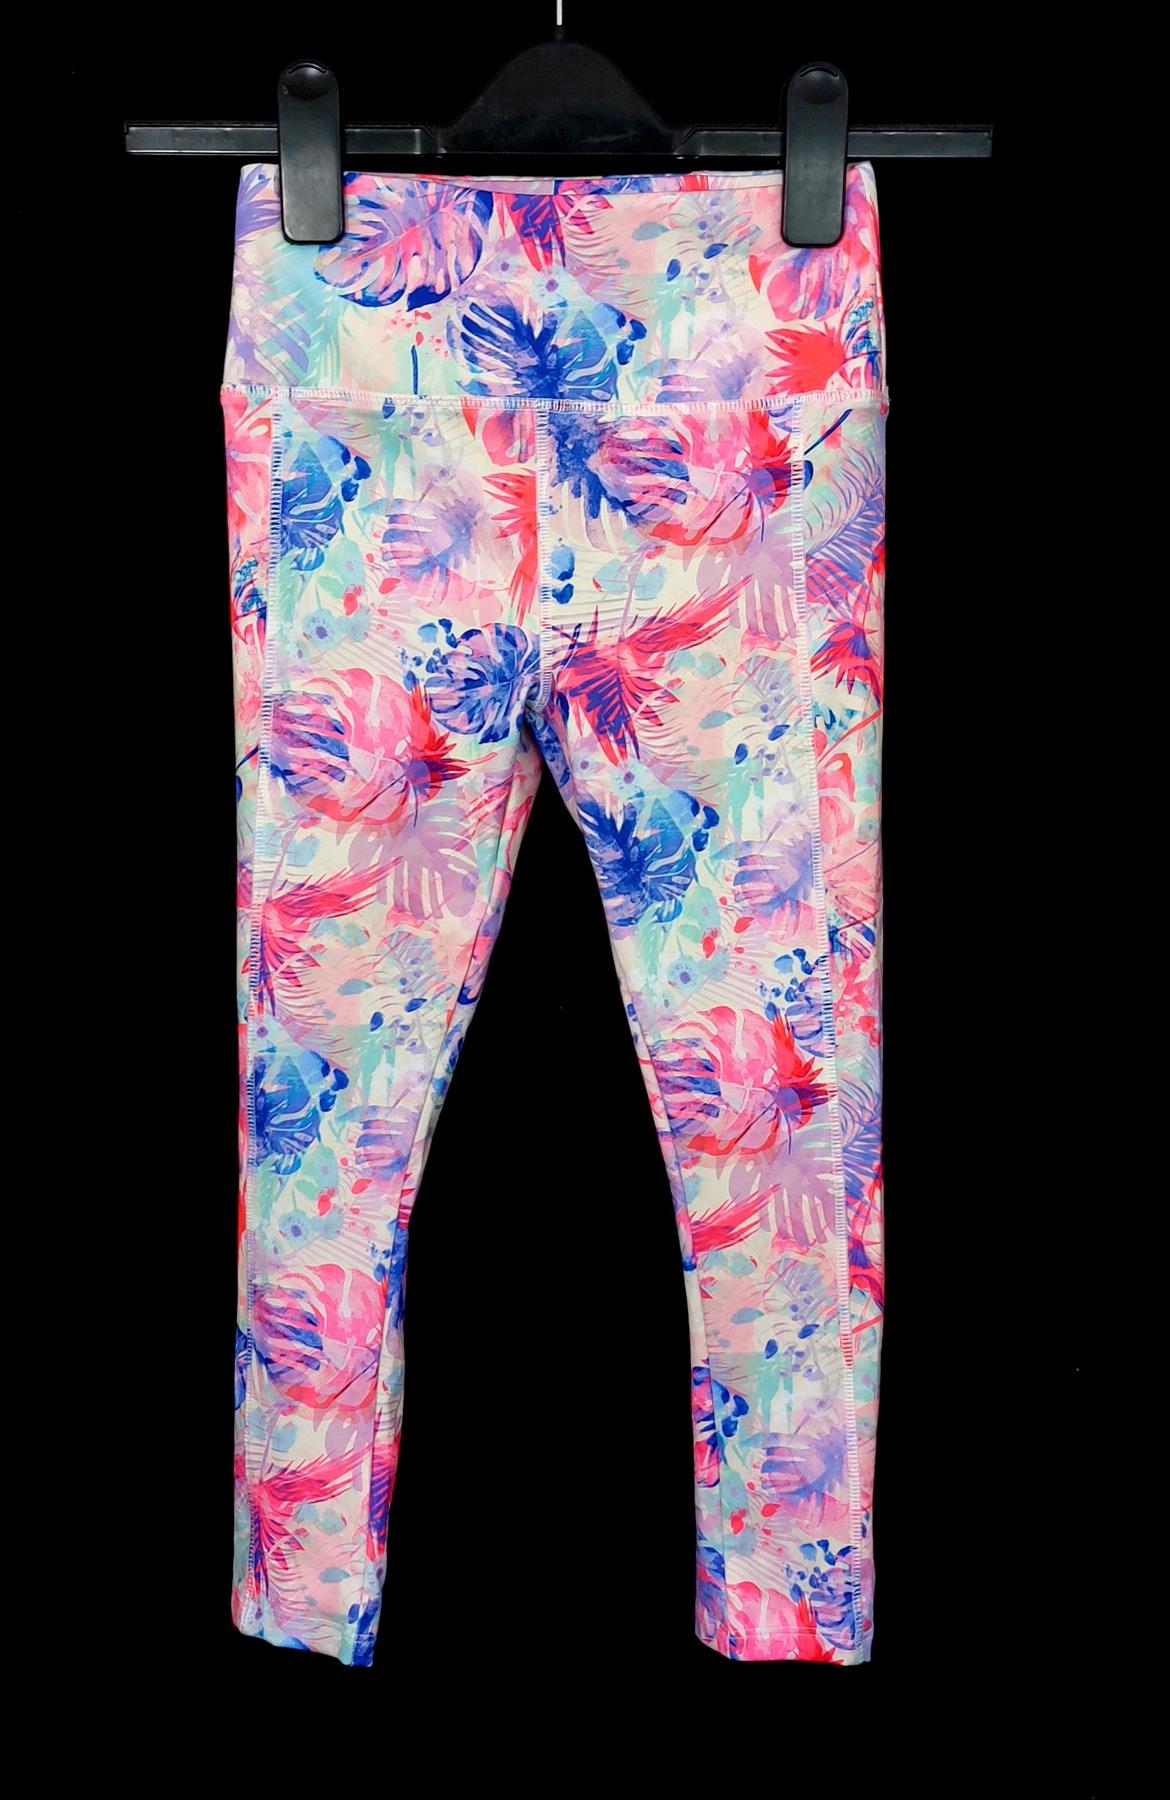 Girls' Sport Leggings Stretch Joggers Pink Tropical Chainstore Brand New